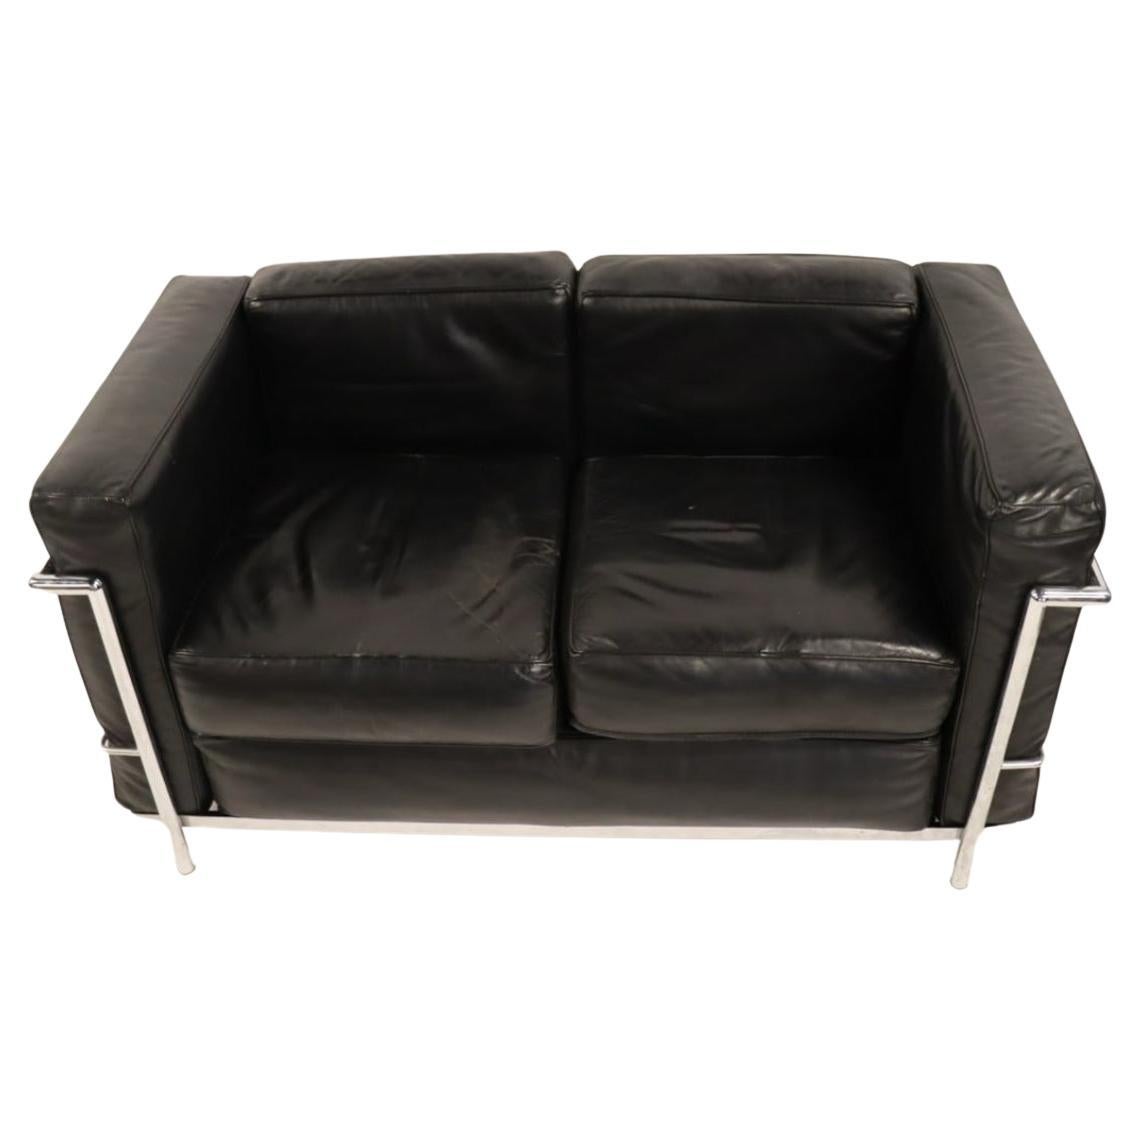 Vintage 2 seat sofa or lovseat by Le Corbusier. Model LC2 in black Leather in very good vintage condition shows use and patina. Triple chrome plated steel frame. All straps are good - all cushions come out. Made In Italy. No other Labels or stamps.